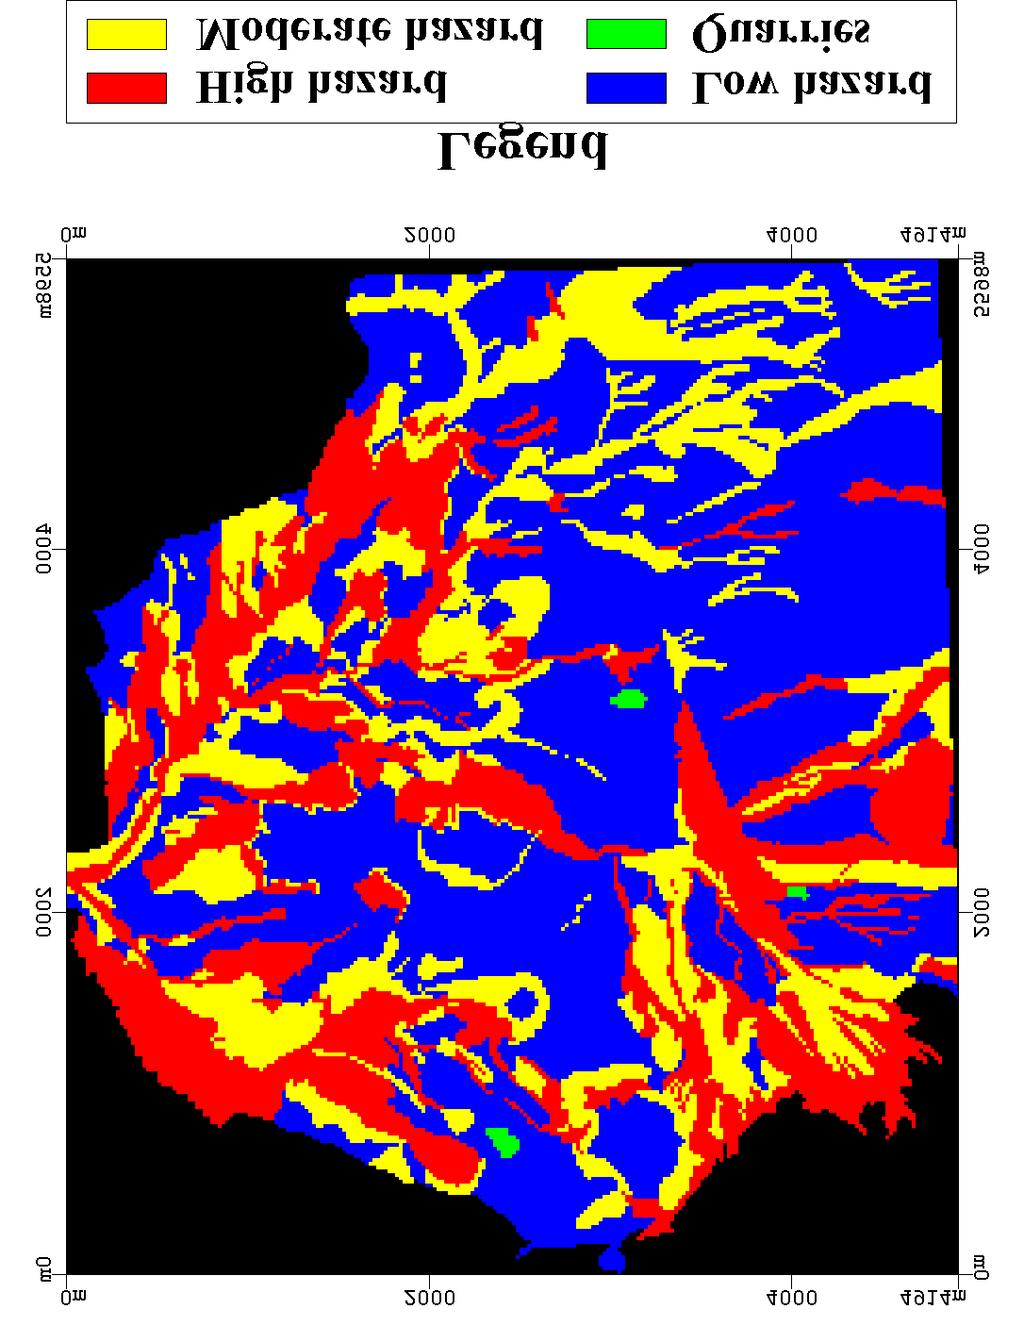 This result suggests that the land-condition on the landslide occurrence area may be similar in terms of causal factors, which is important information from the viewpoints of the periodicity of the